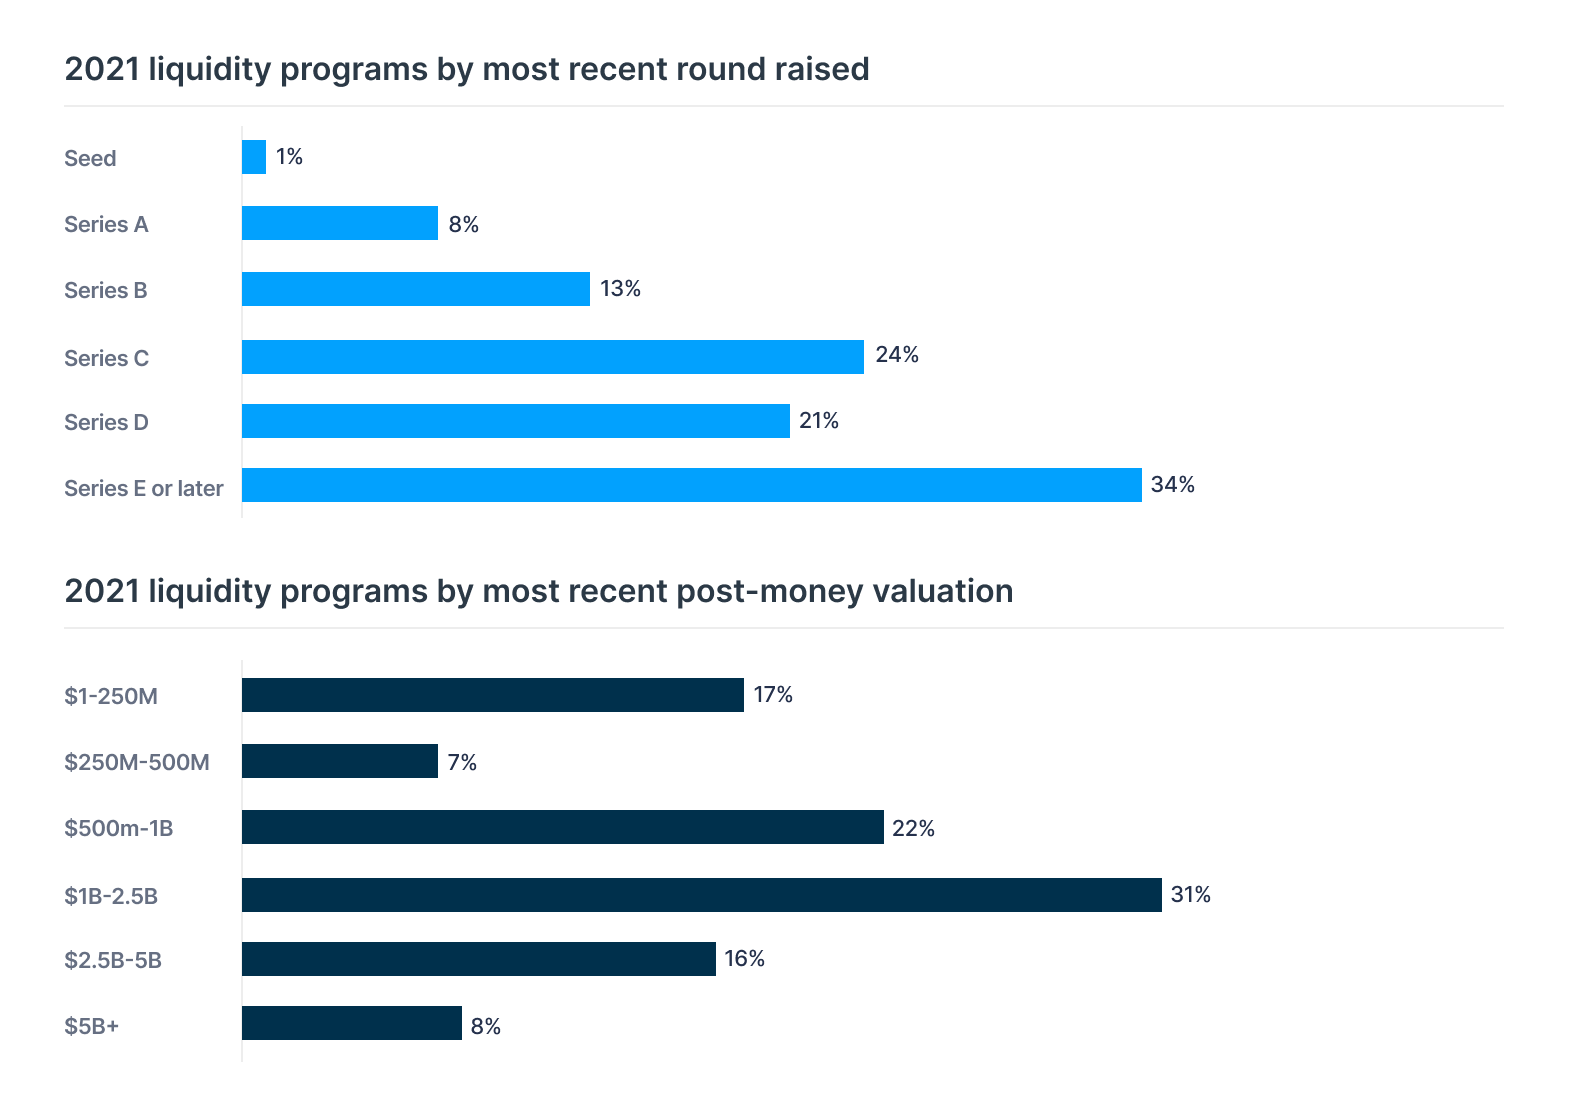 2021 liquidity programs by most recent round raised chart and 2021 liquidity programs by most recent post-money valuation chart